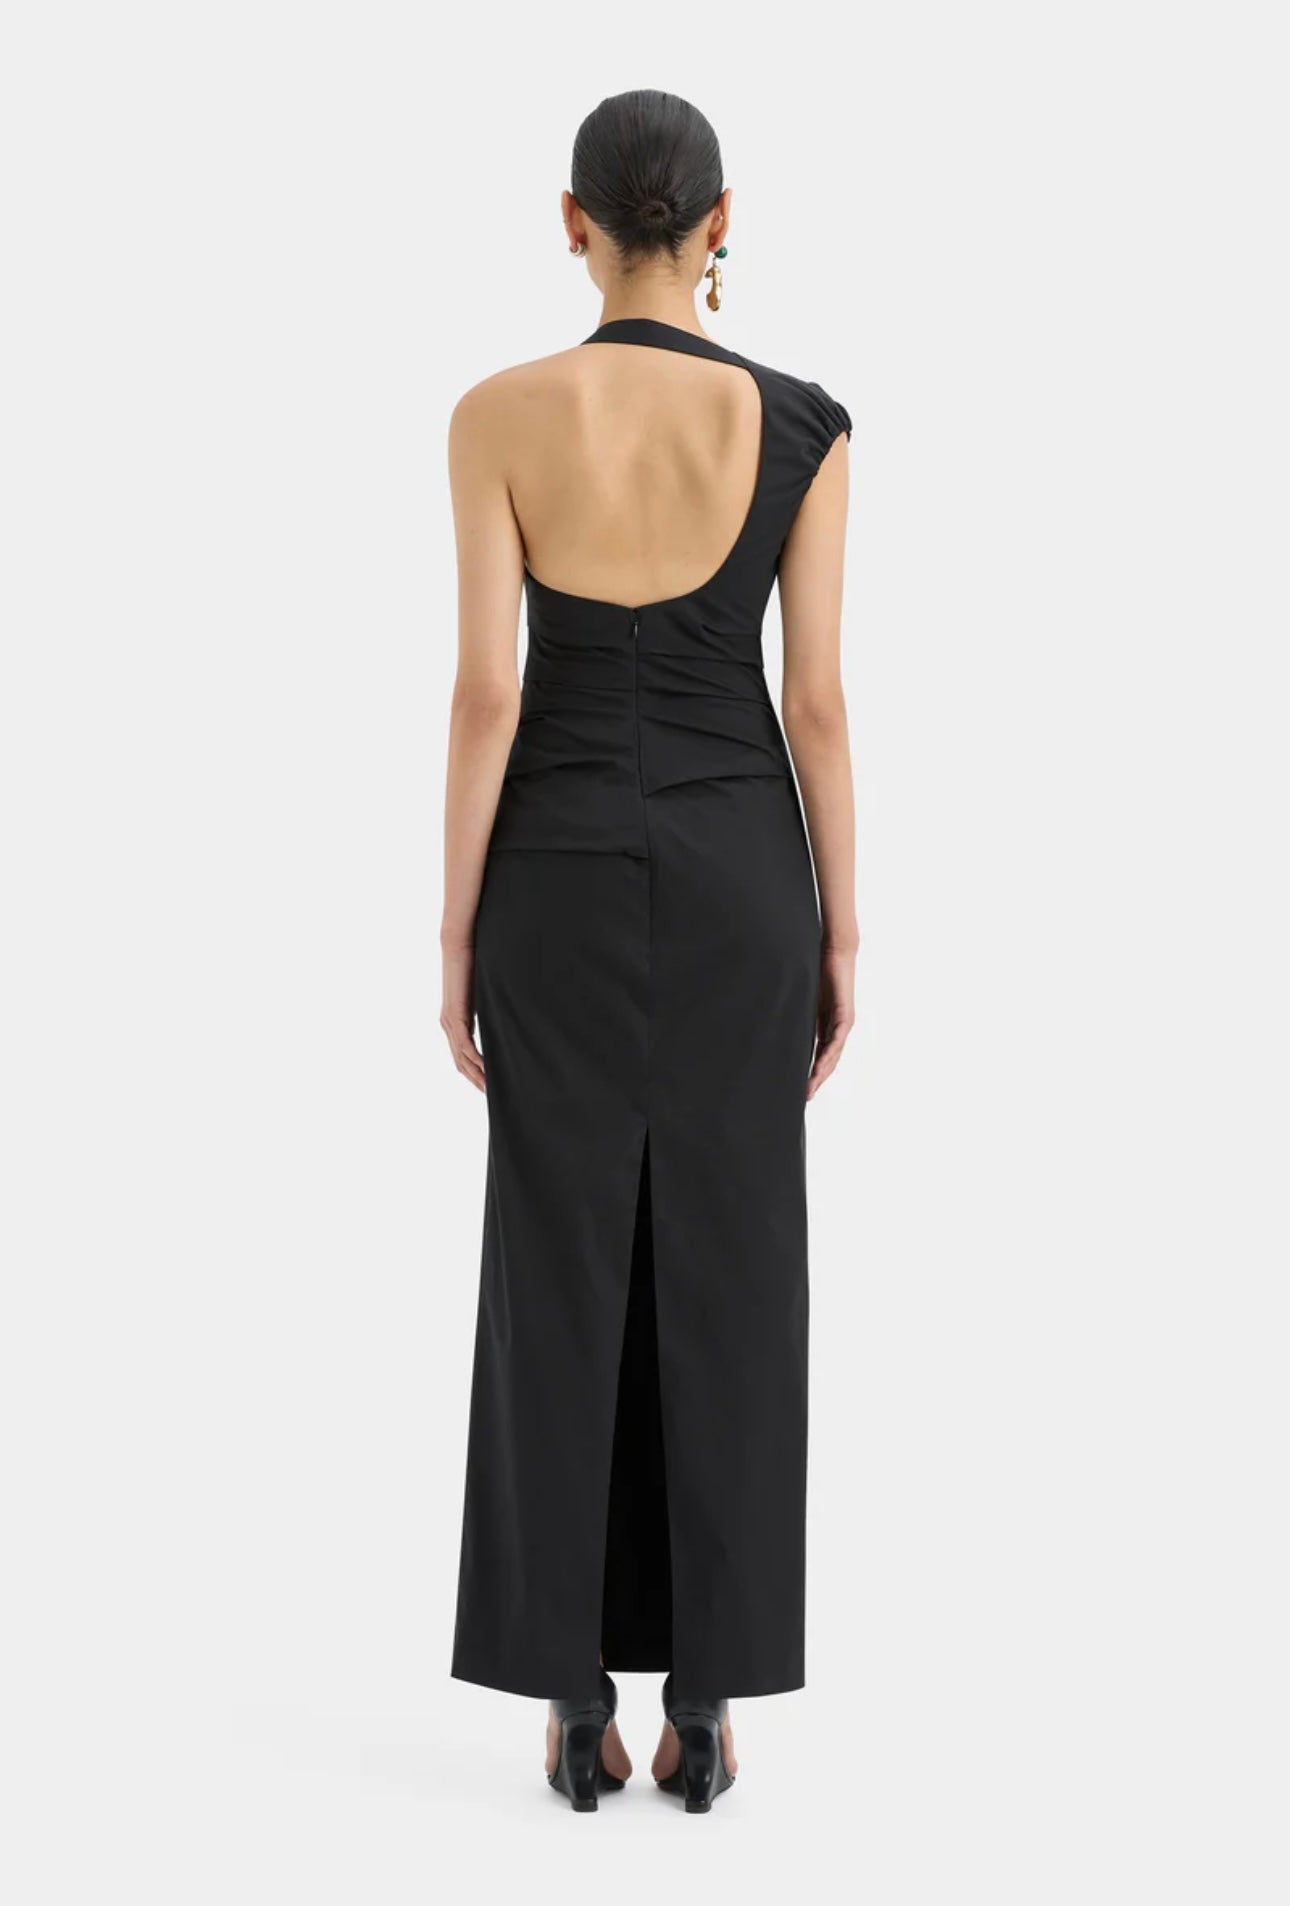 Sir The Label Giacomo Gathered Gown Black